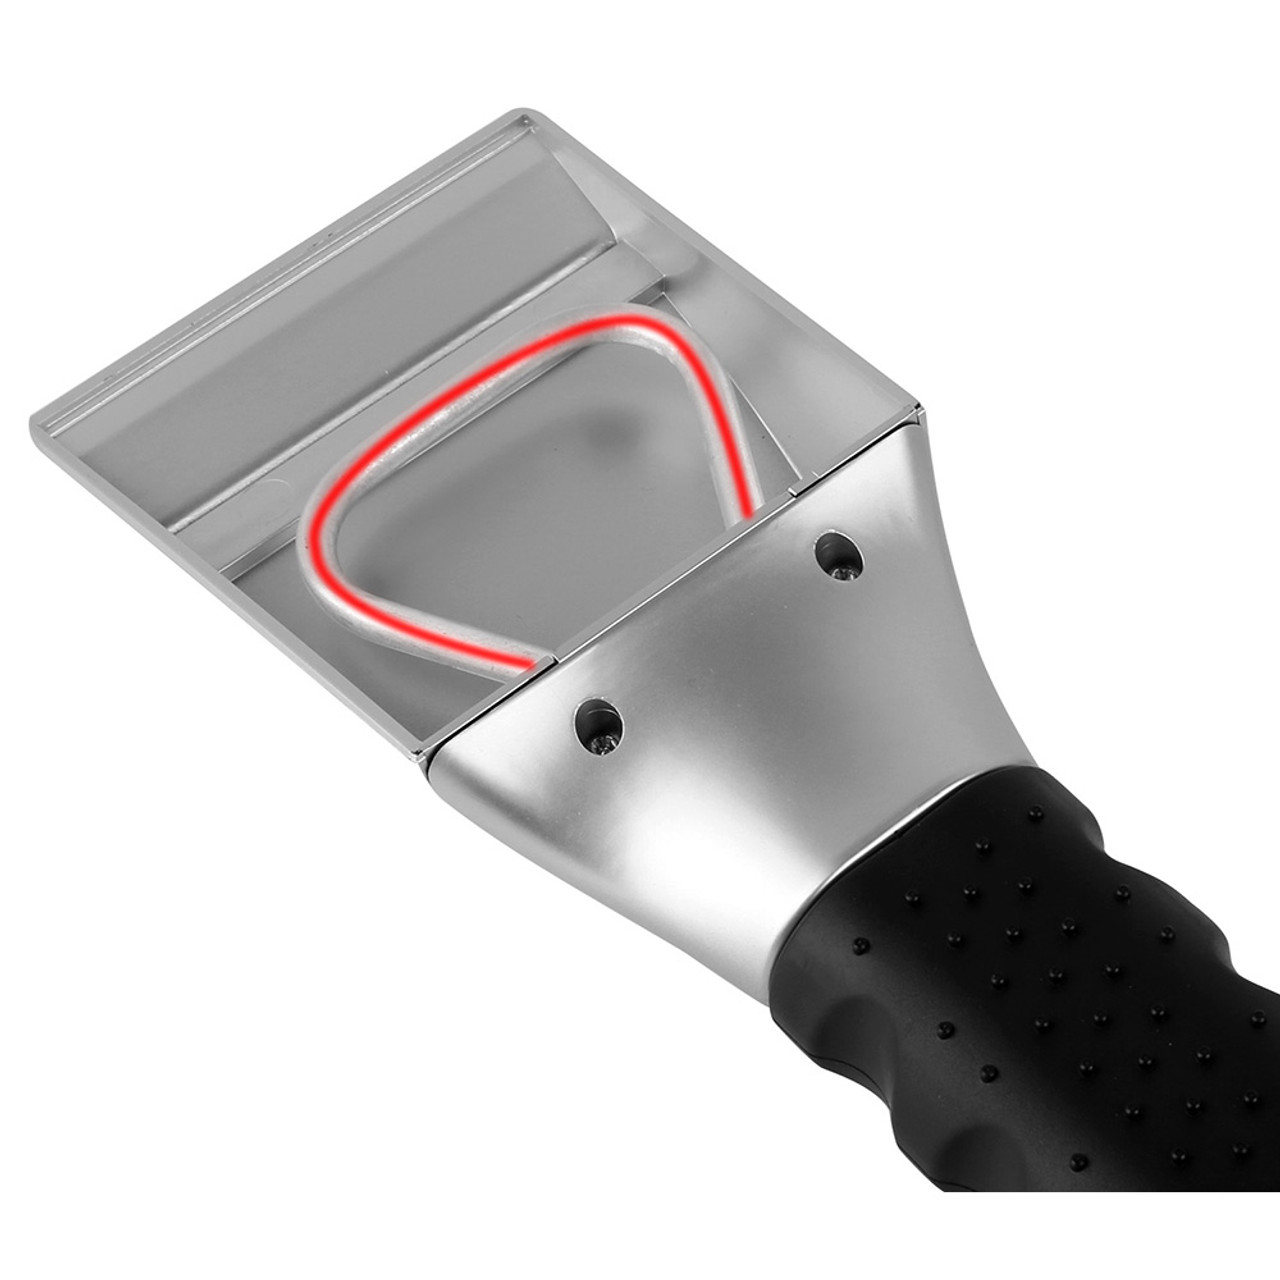 12V Electric Car Windshield Ice Snow Scraper product image